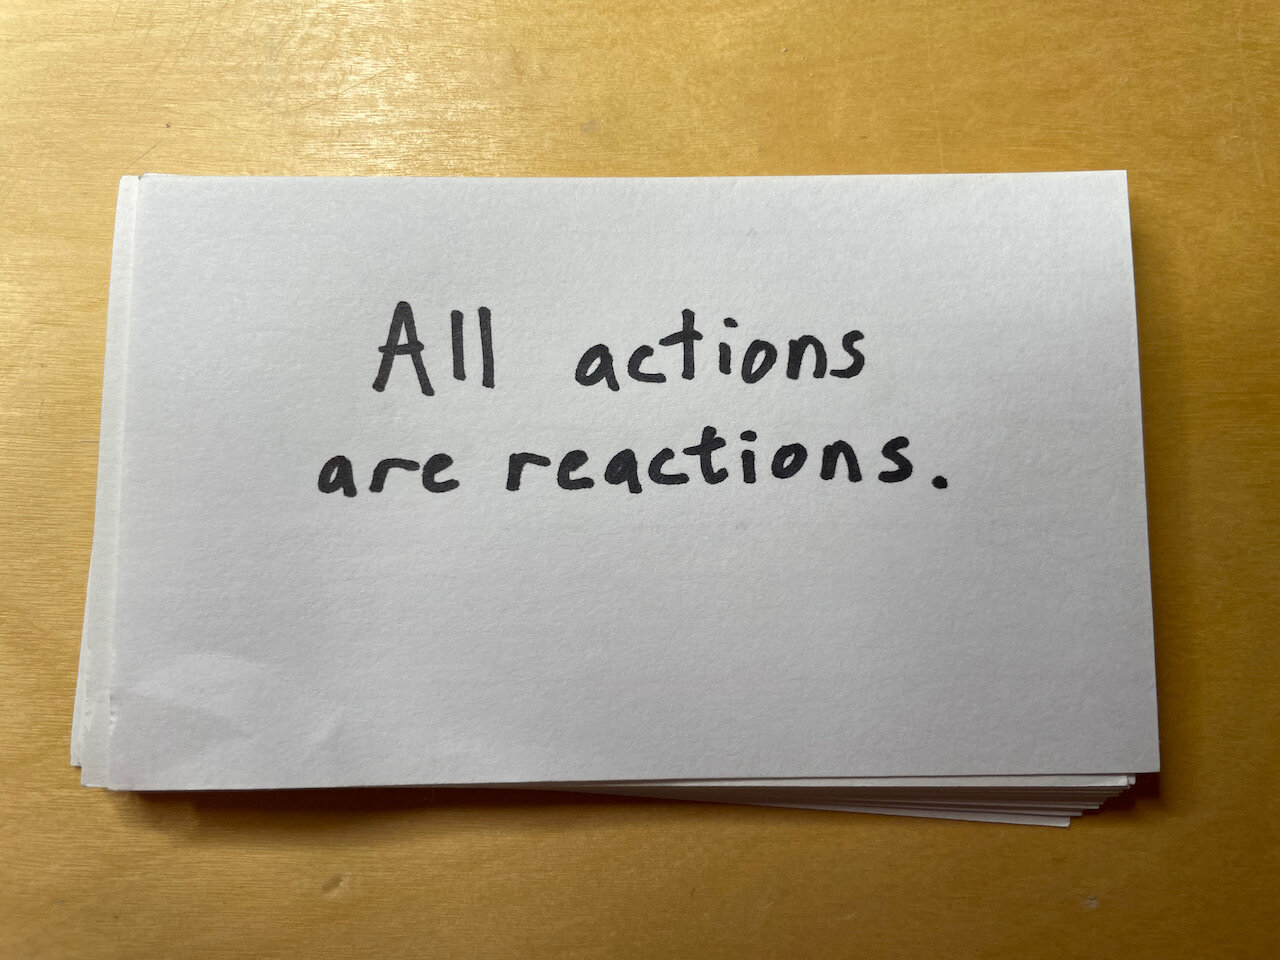 All actions are reactions.